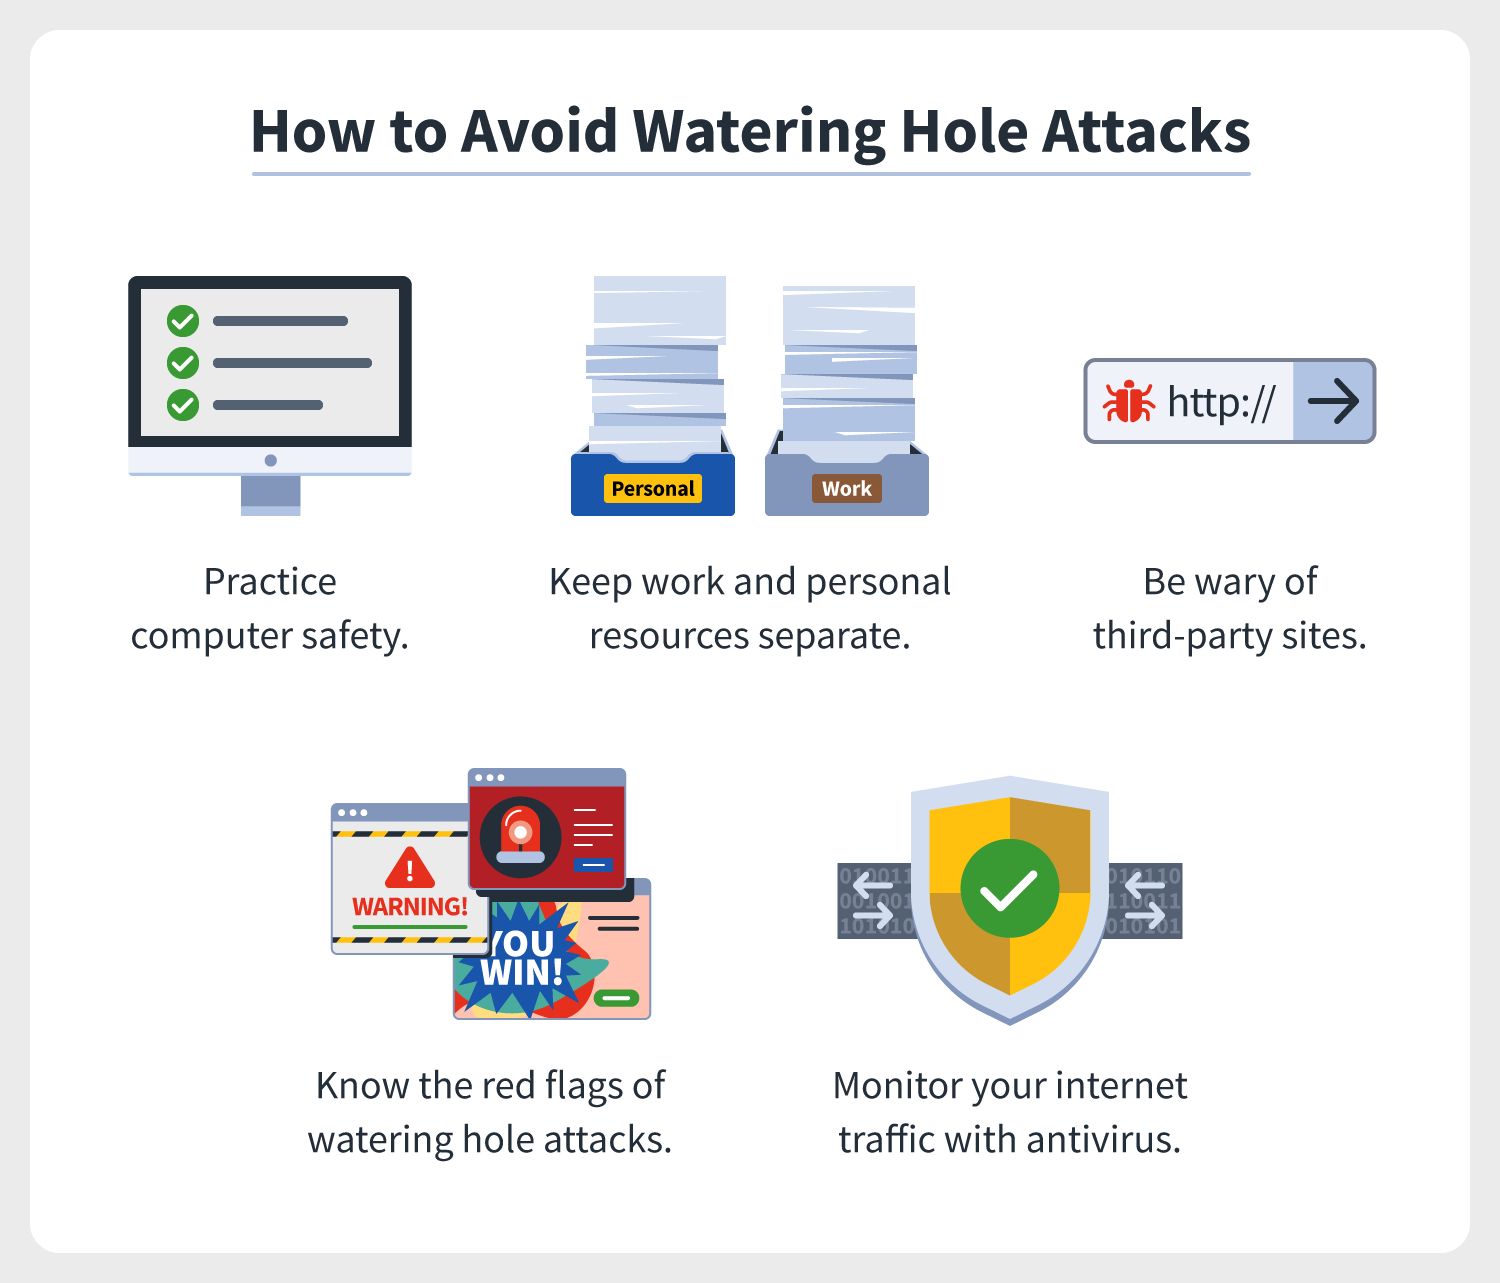 How to avoid watering hole attacks